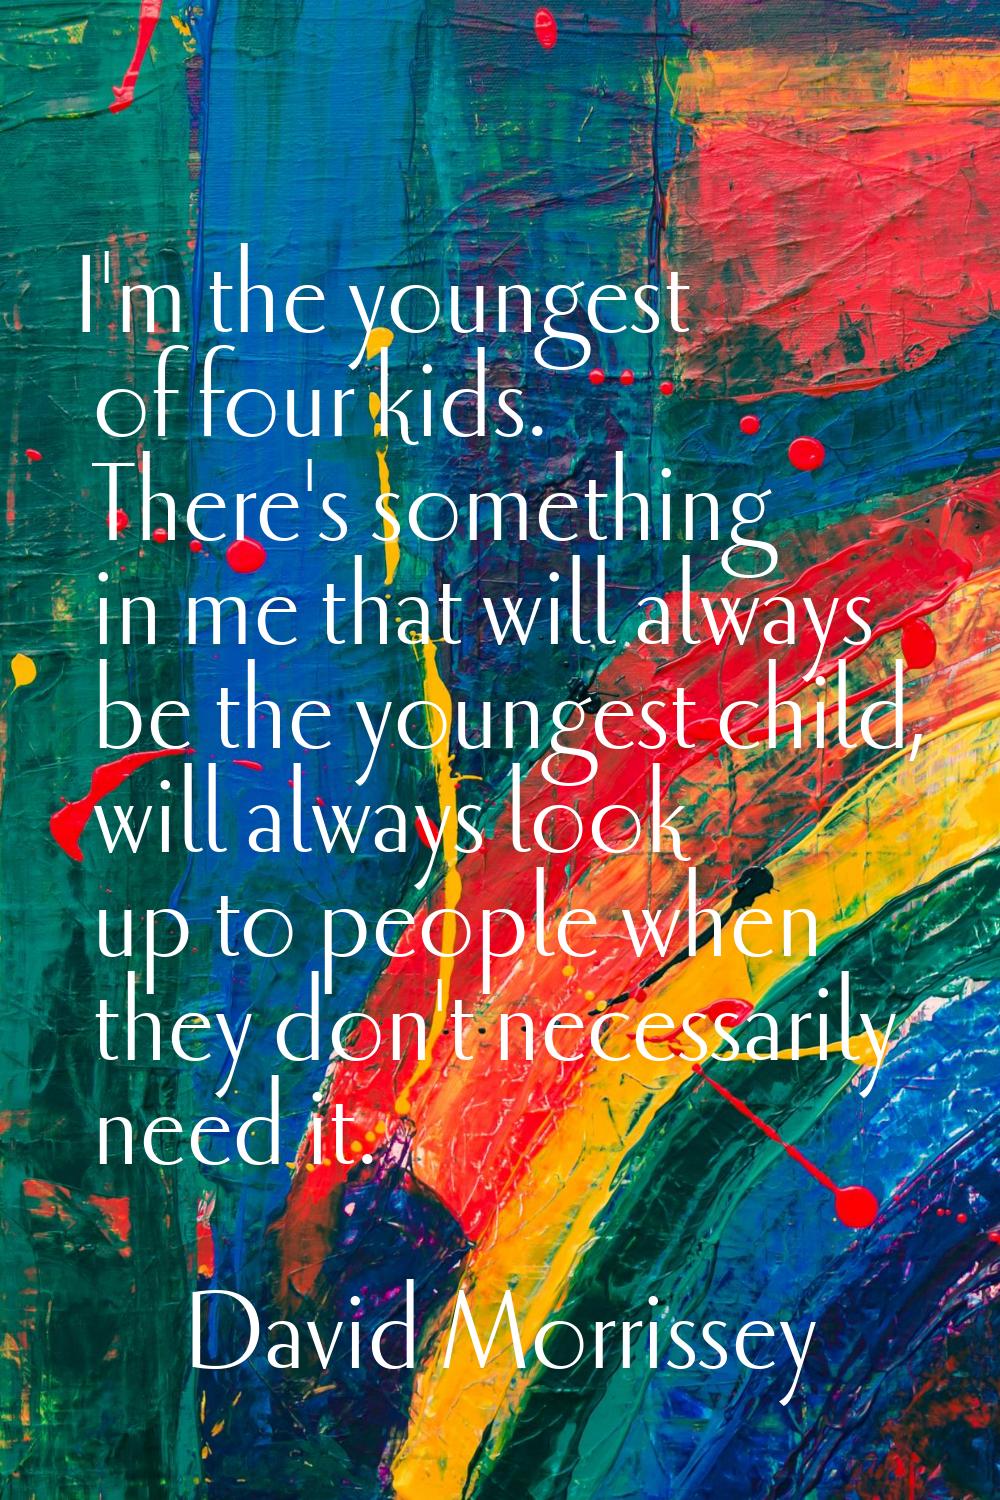 I'm the youngest of four kids. There's something in me that will always be the youngest child, will